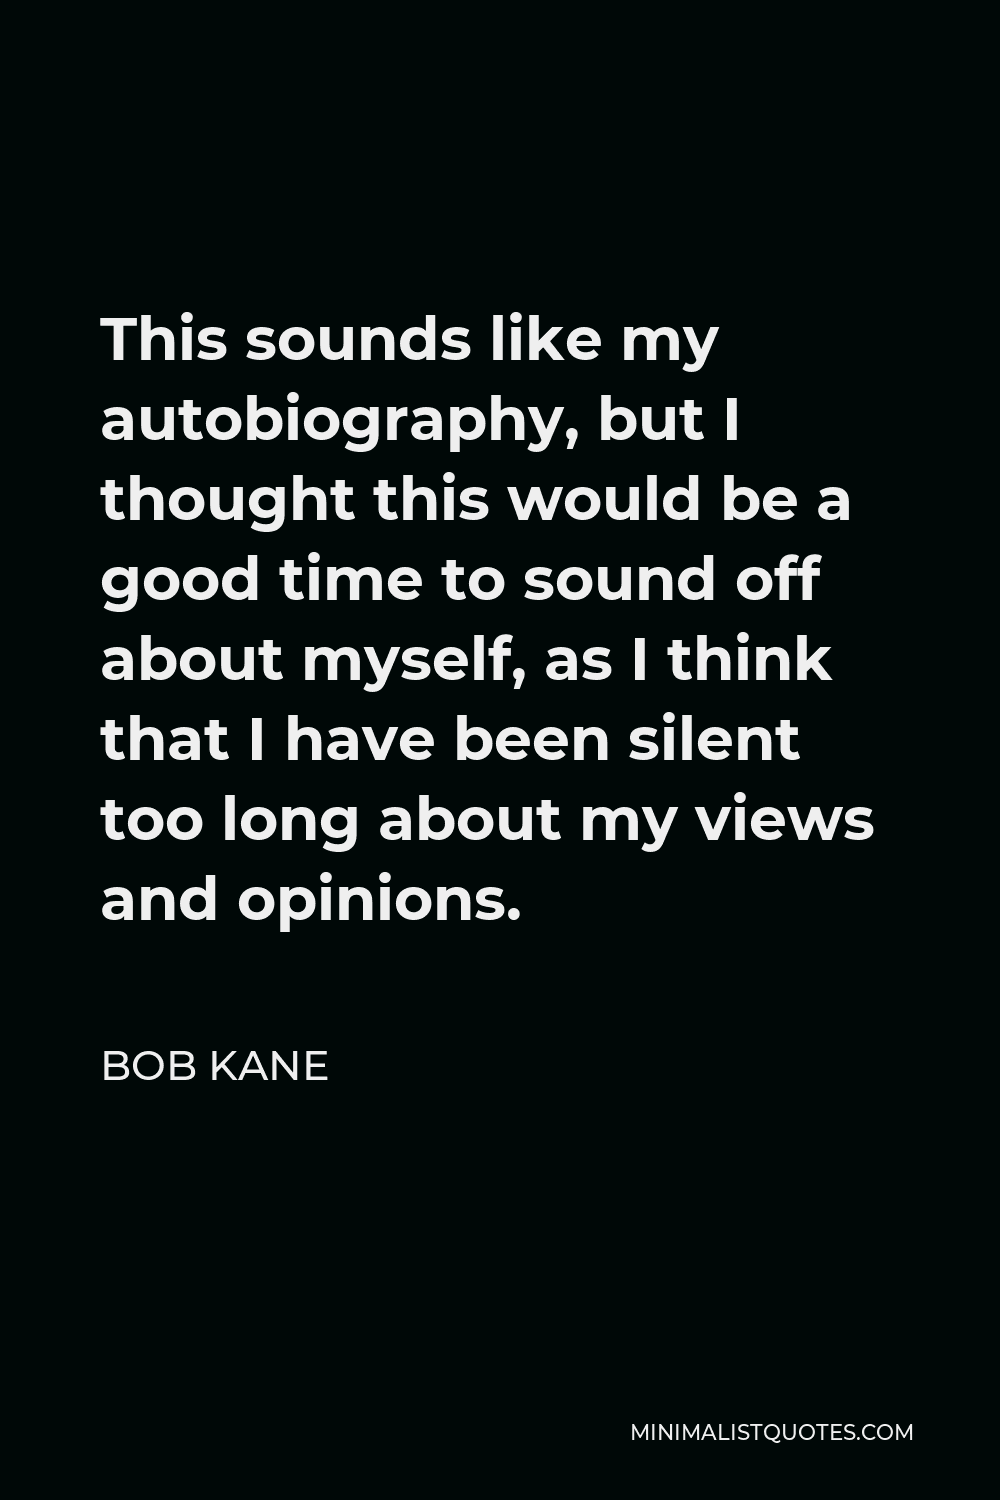 Bob Kane Quote - This sounds like my autobiography, but I thought this would be a good time to sound off about myself, as I think that I have been silent too long about my views and opinions.